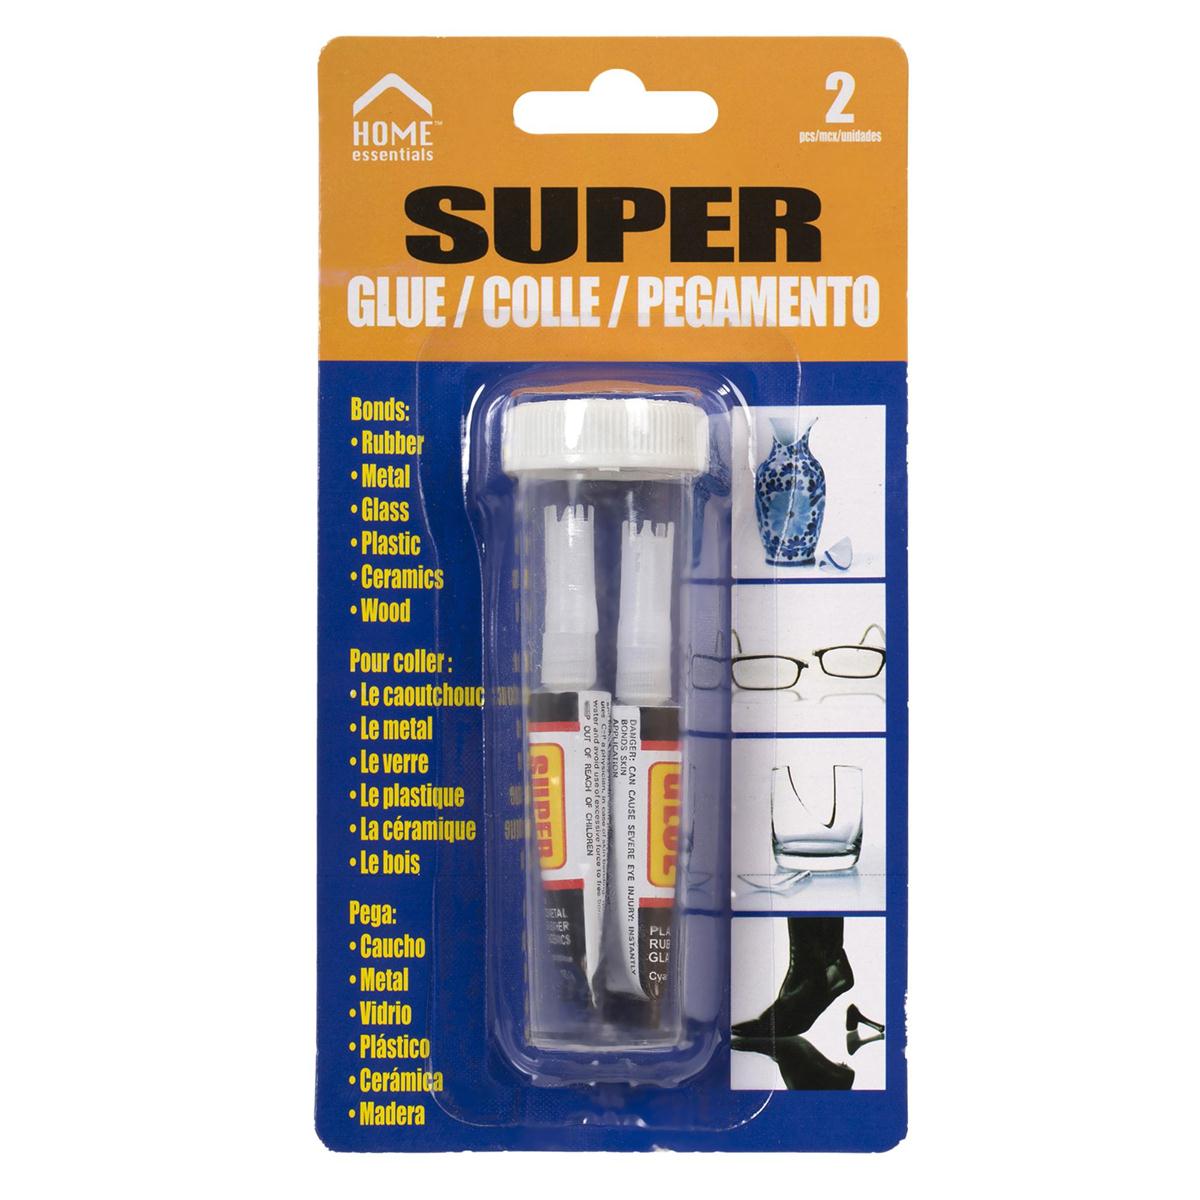 H.E. 2-Piece Super Glue with Safety Tubes, 3g per Tube